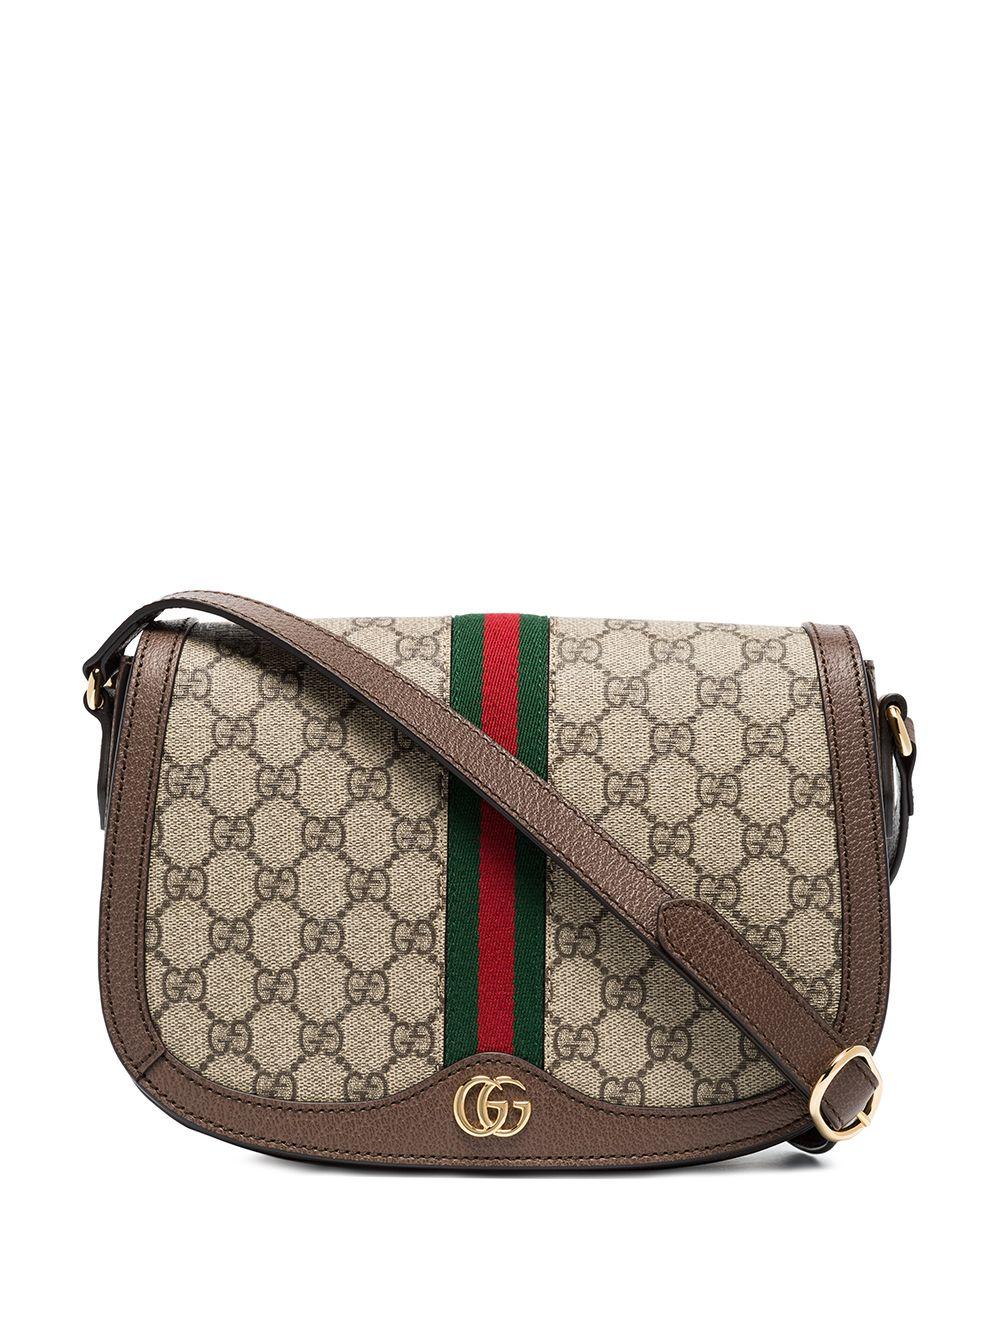 Gucci Ophidia Saddle Bag in Brown | Lyst